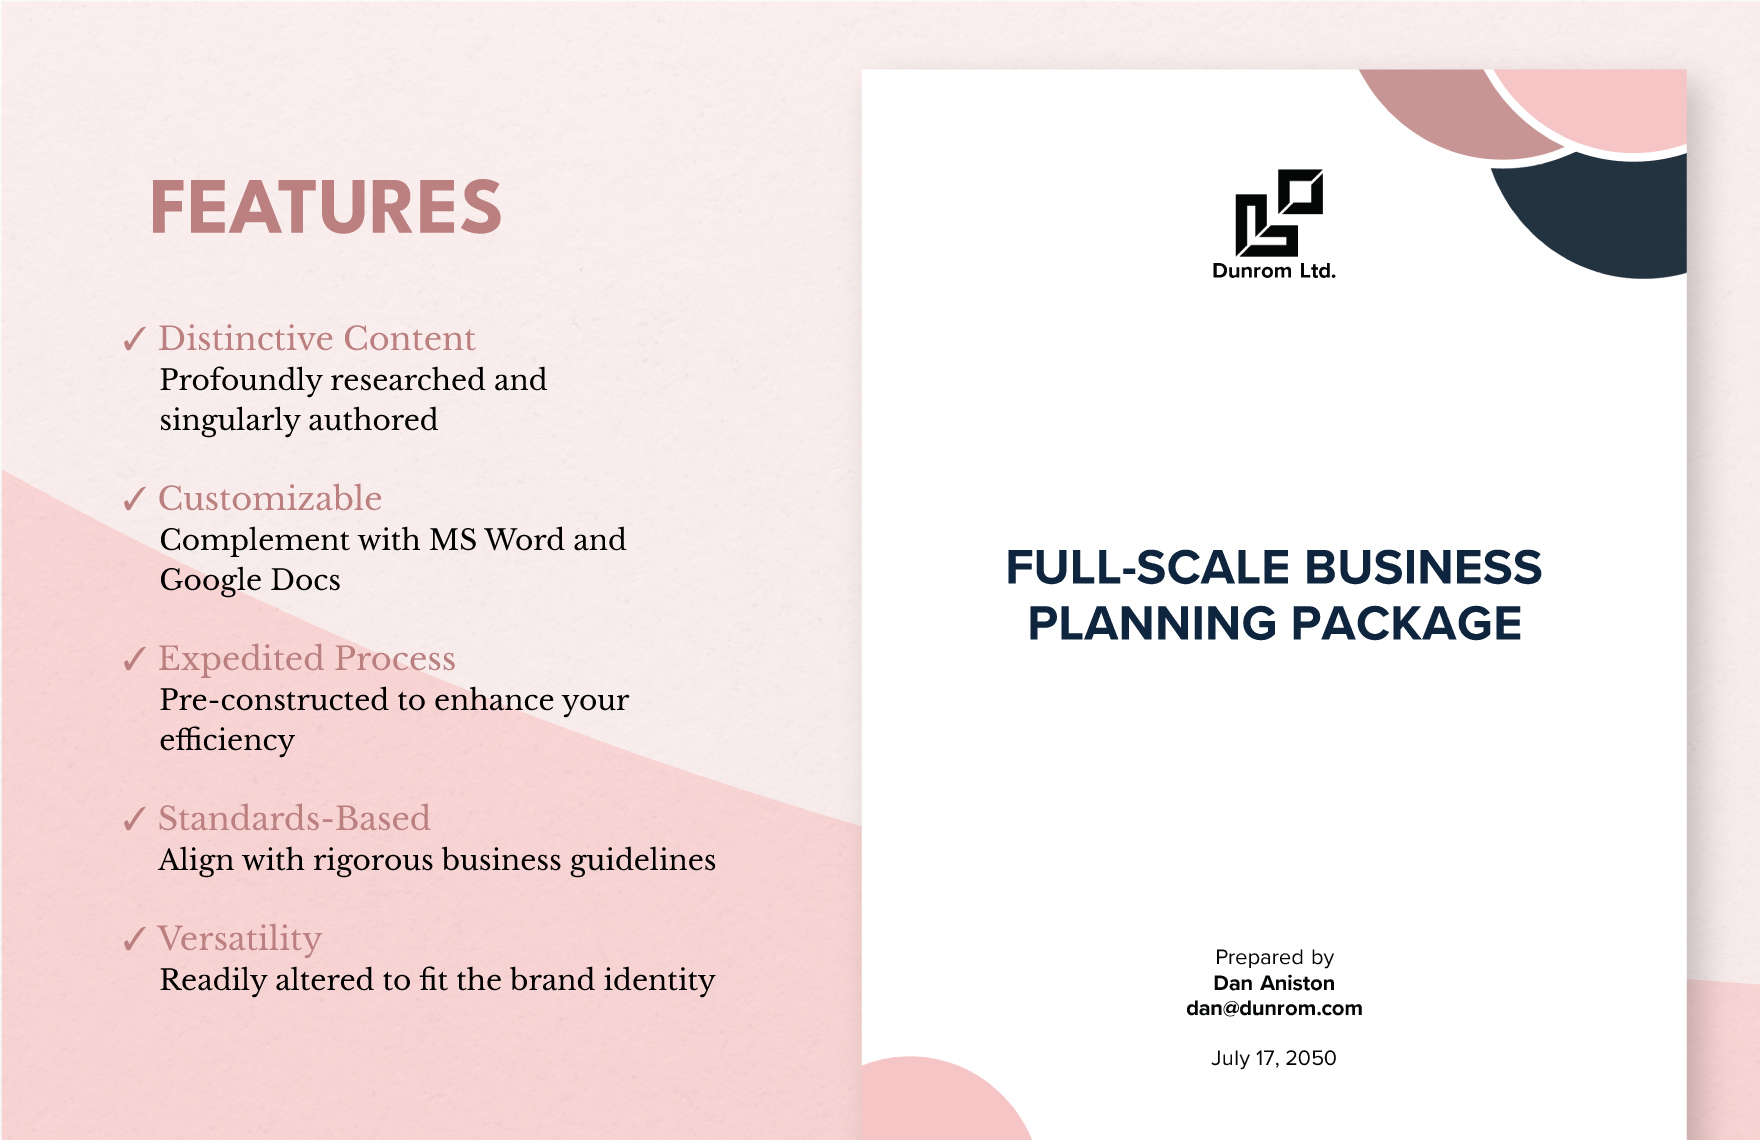 Full-scale Business Planning Package